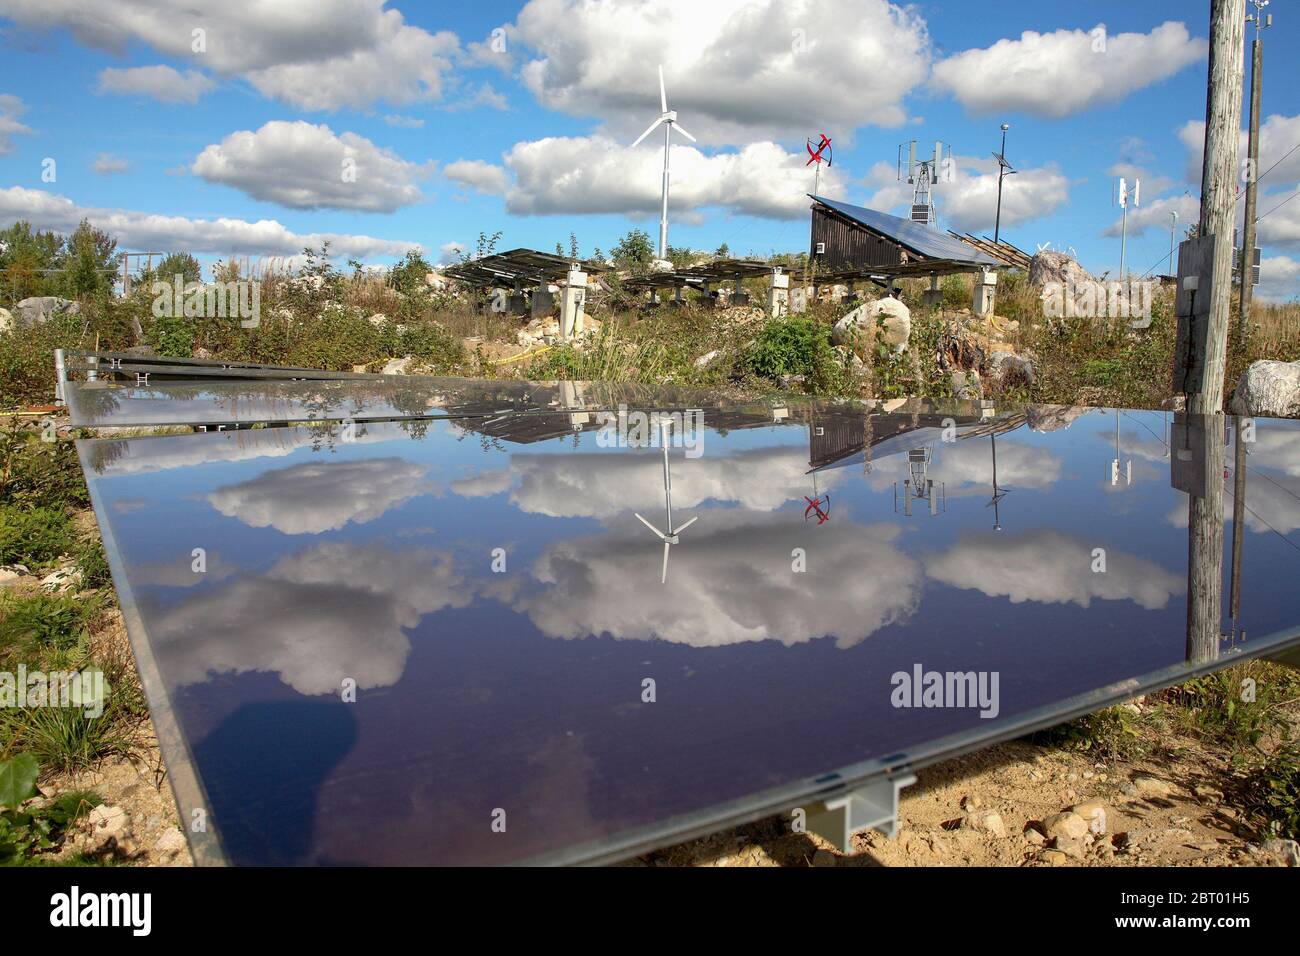 Clouds are reflected in a SOLAR PANEL in an energy park Stock Photo